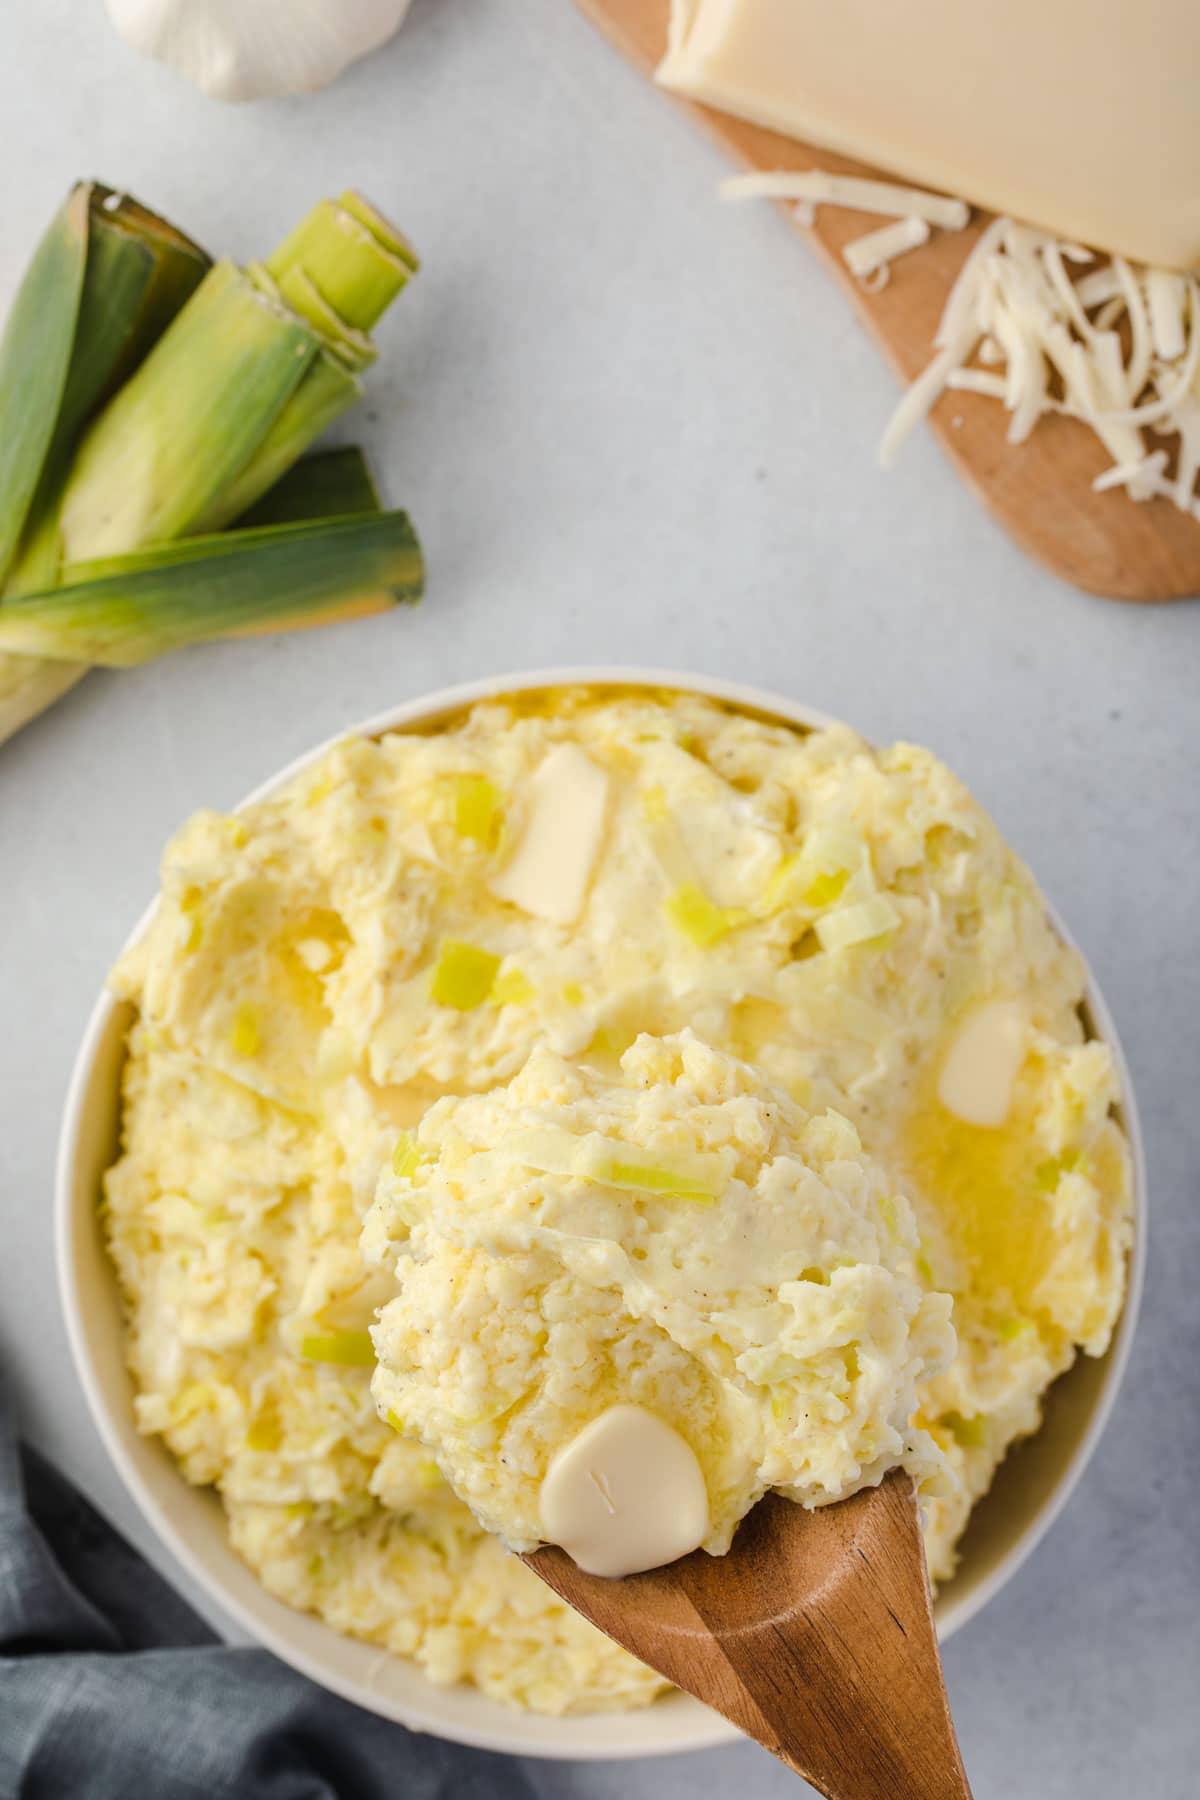 Overhead of mashed potatoes with pools of butter, scooping some out with a wooden spoon.